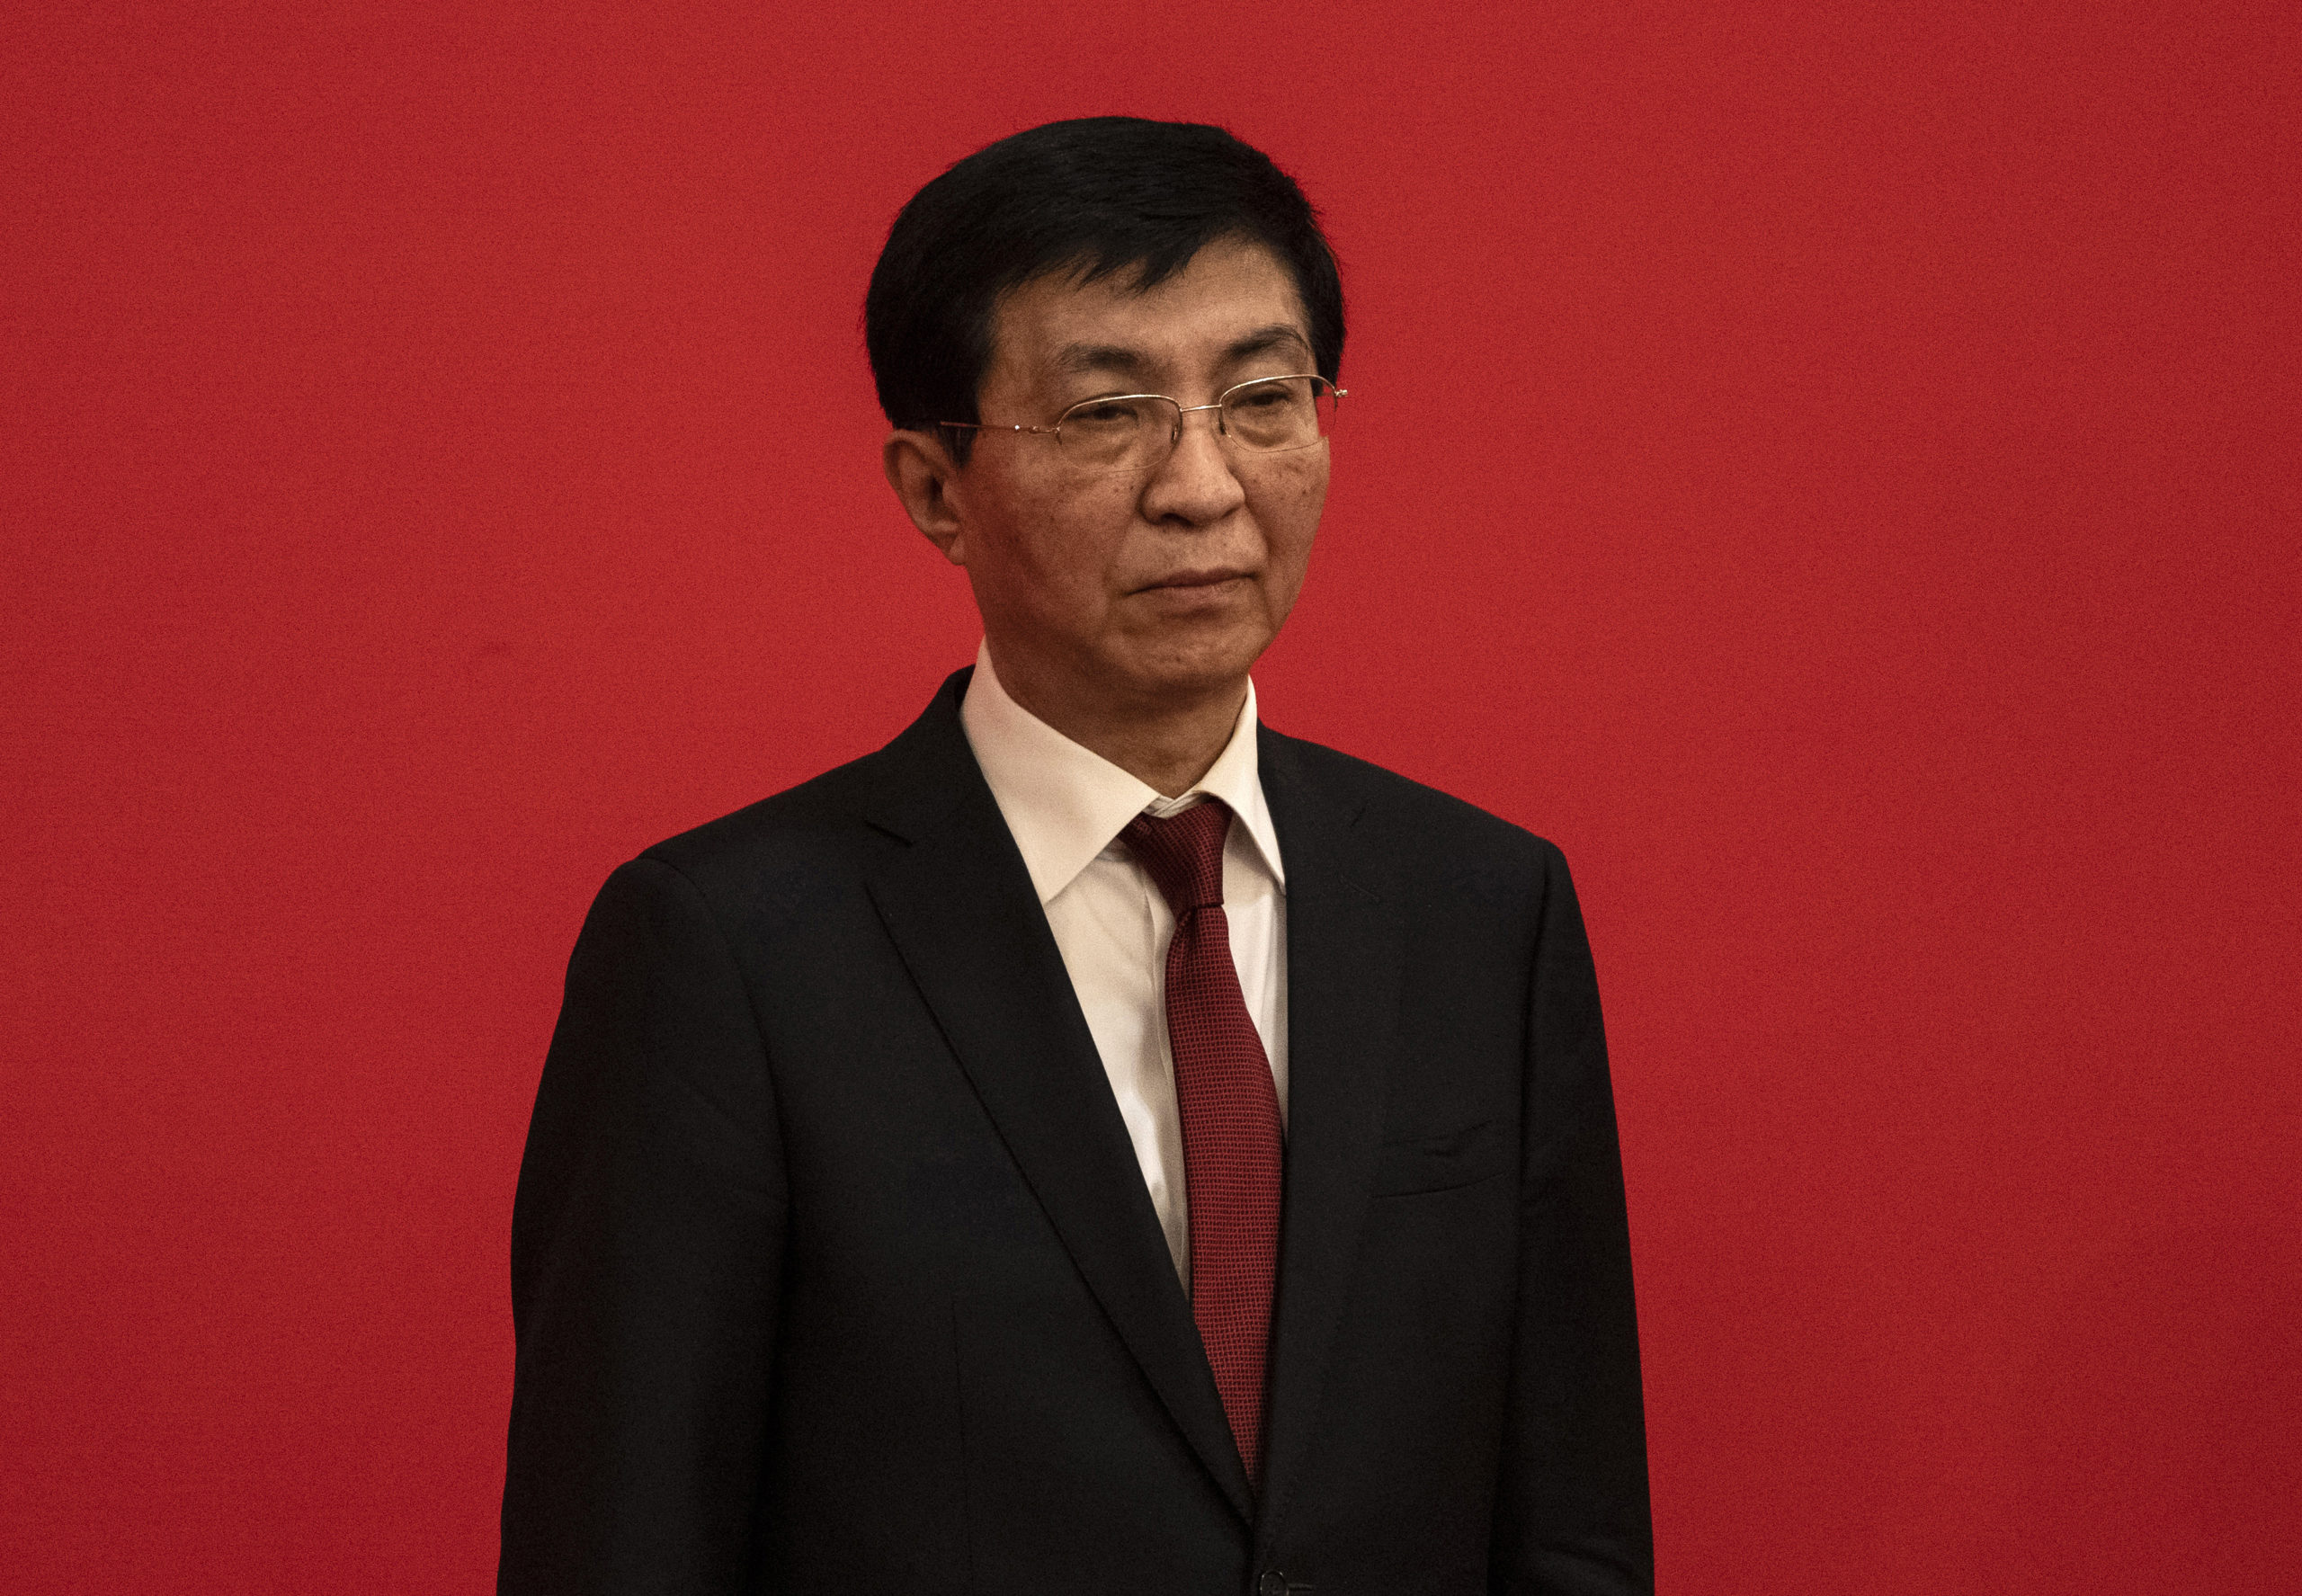 The Most Influential Man in China